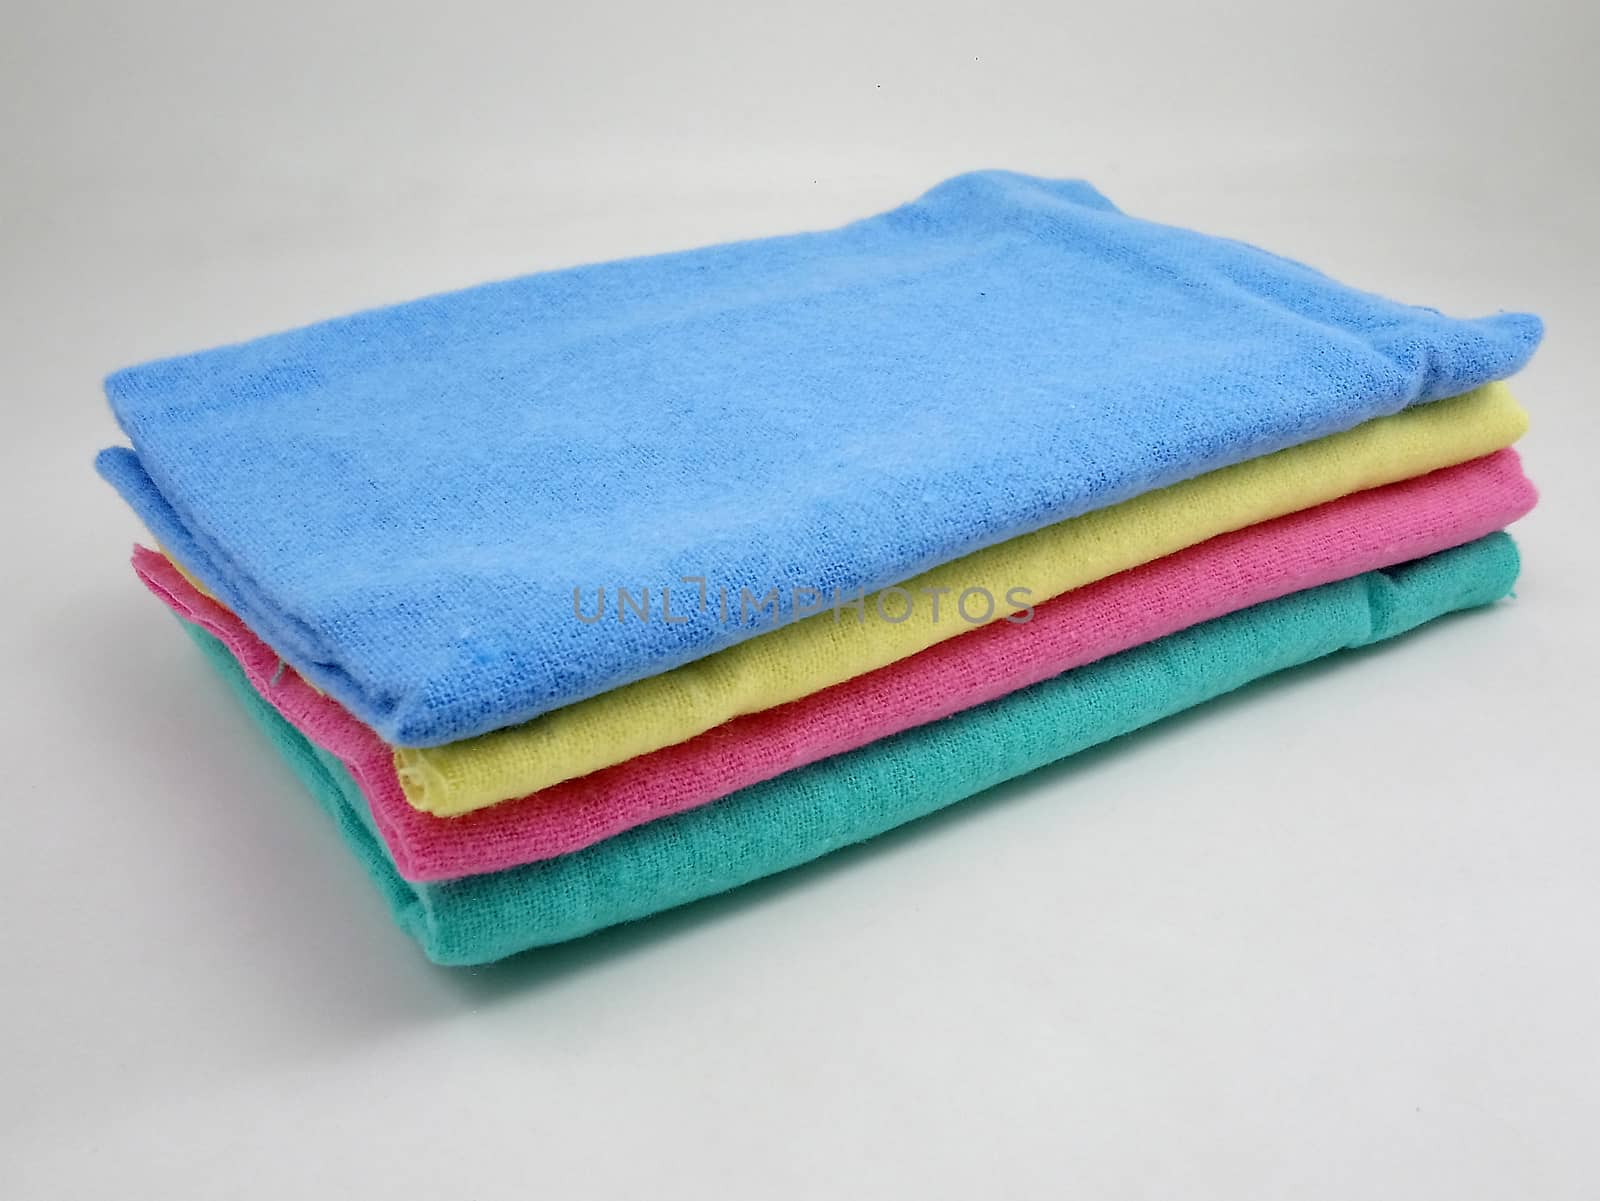 Pranela colorful cloth cleaner use to wipe excess water  by imwaltersy